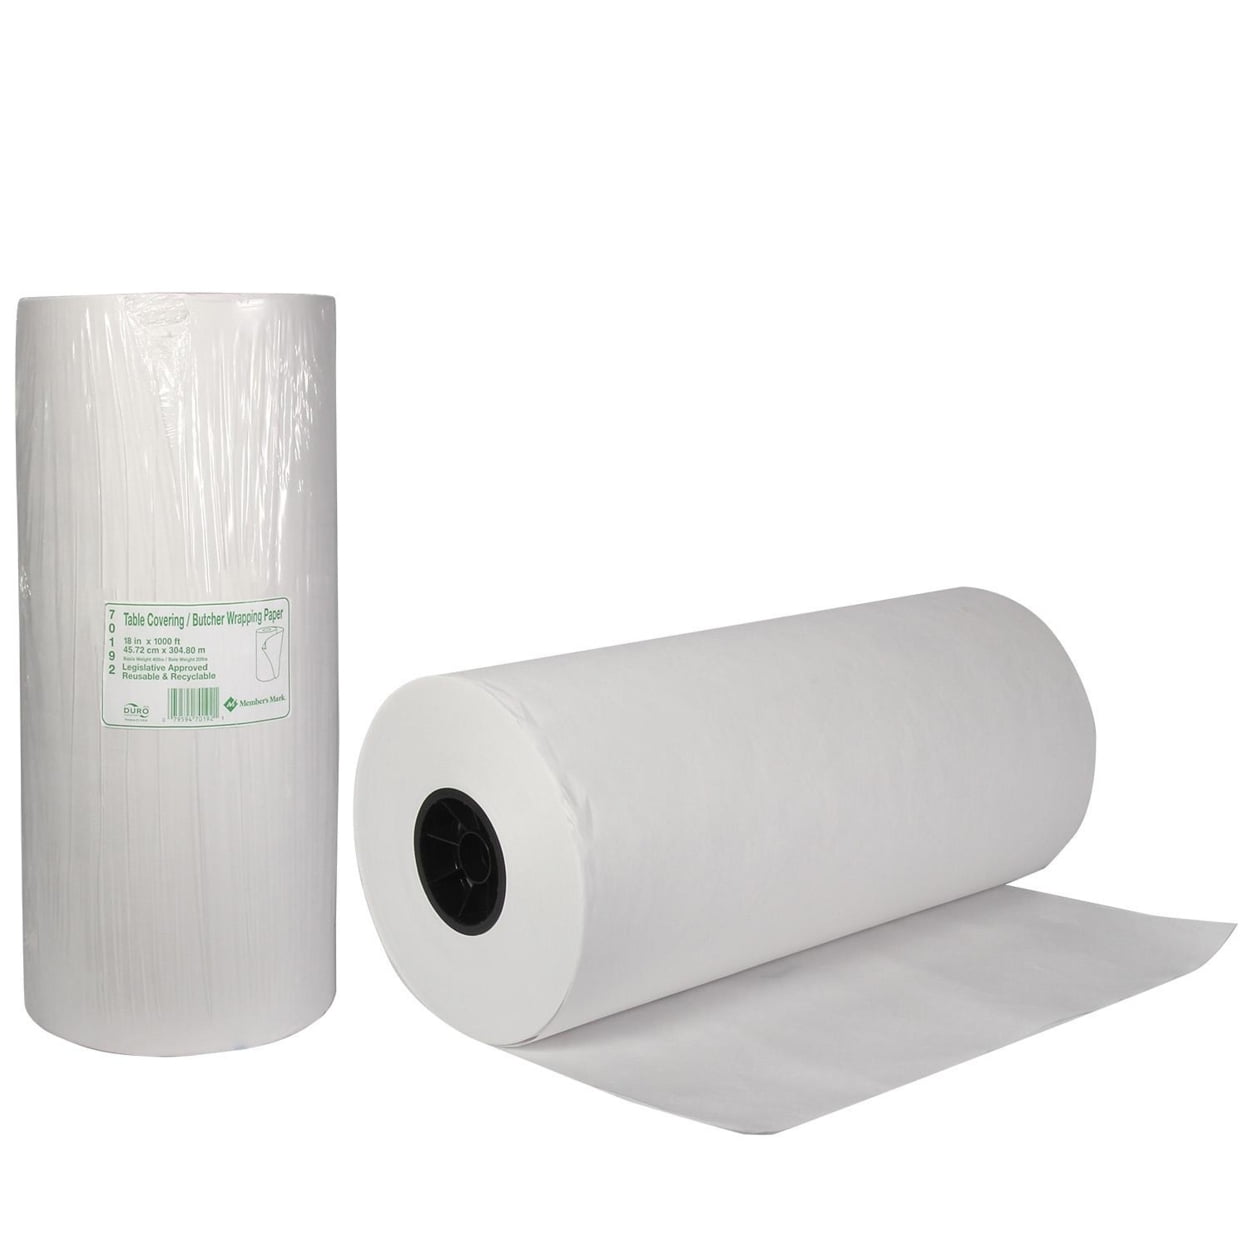 4 PACK] MG15 White Butcher Food Paper Roll 15-Inch - Roll for